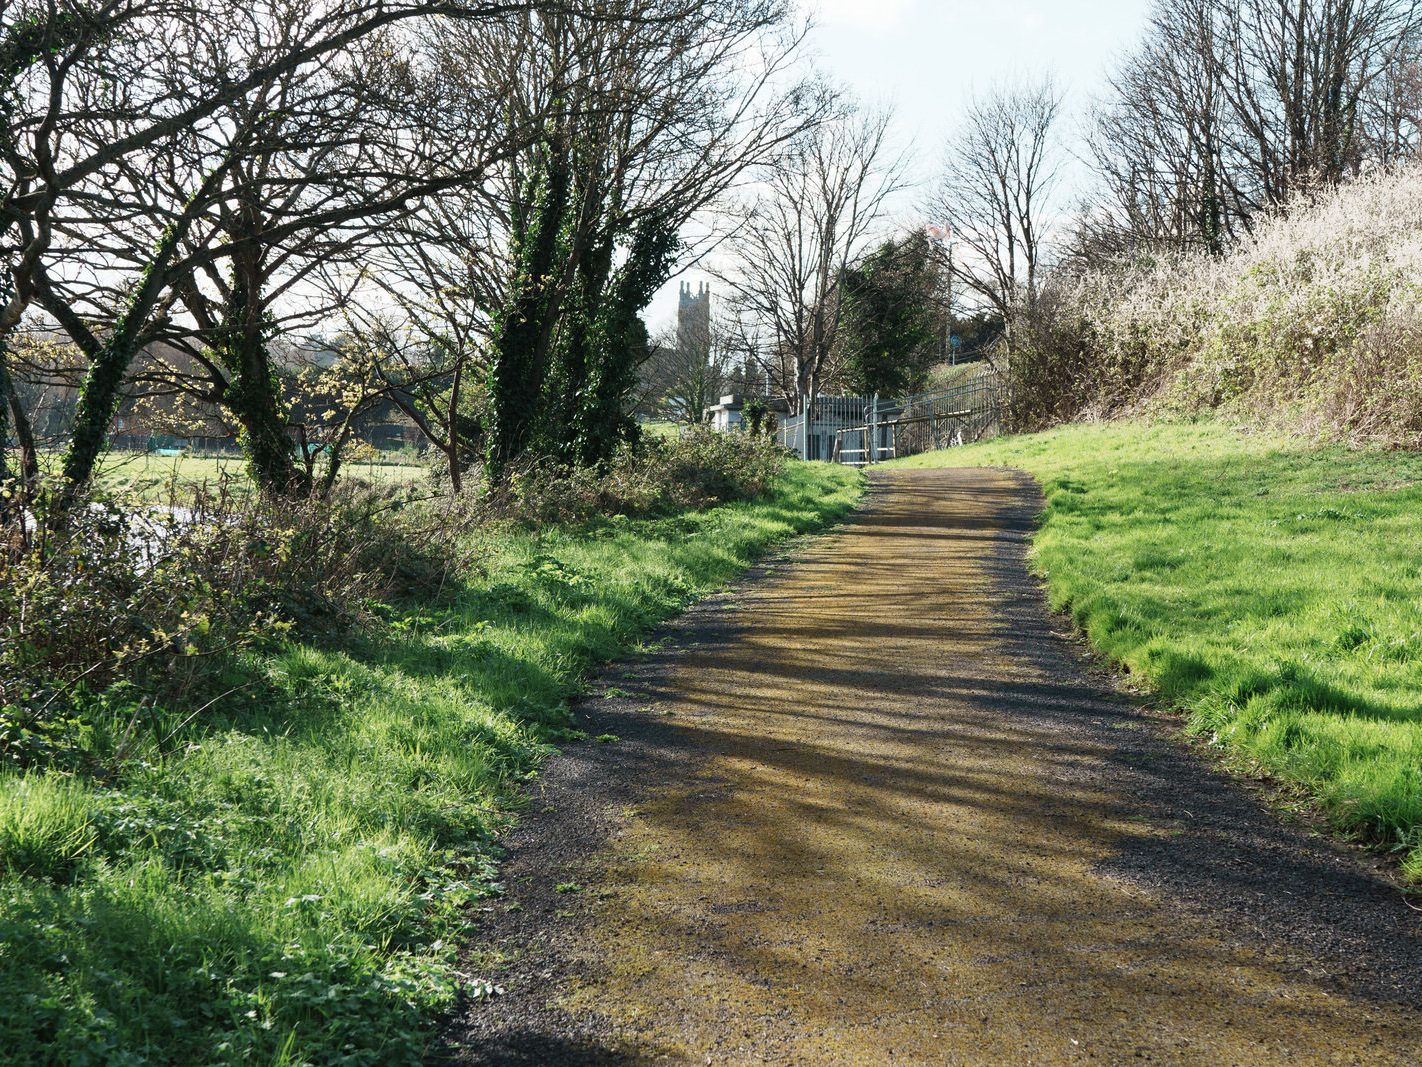 LIFFEY VALLEY PARK AT CHAPELIZOD ON THE NORTH SIDE OF THE RIVER [ACROSS THE ROAD FROM THE ENTRANCE TO PHOENIX PARK]-223364-1